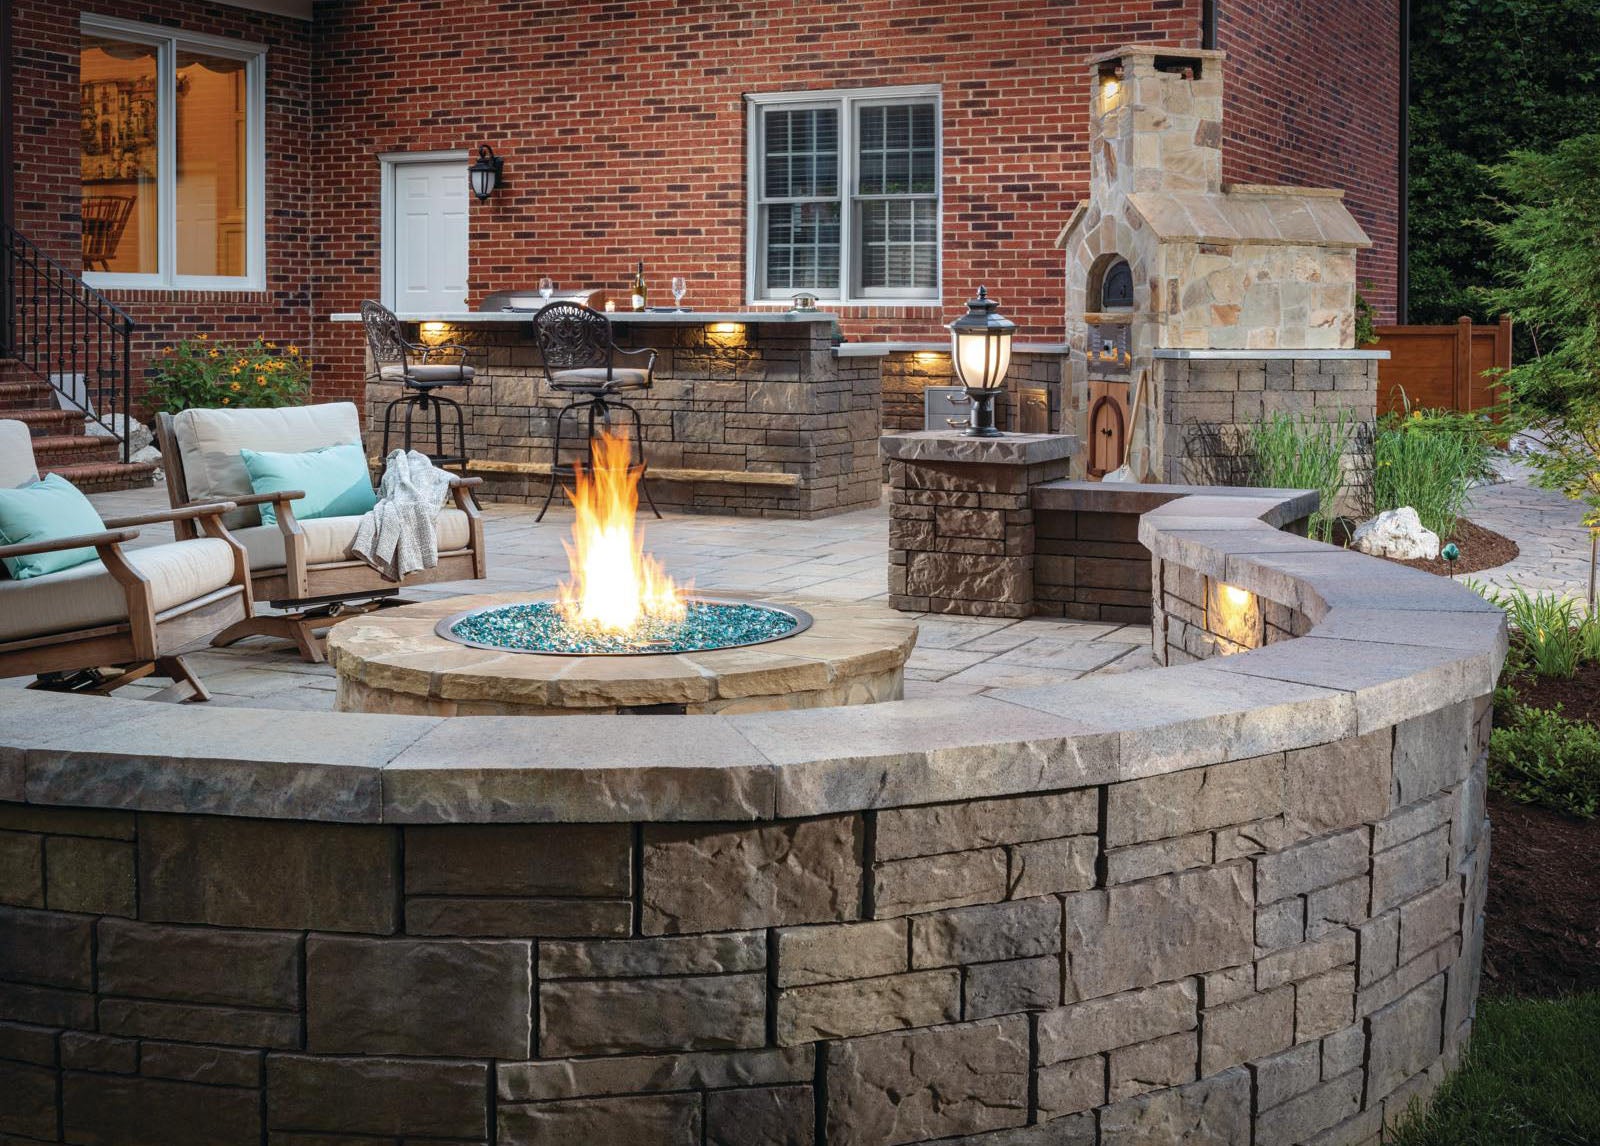 Designing A Patio Around Fire Pit, Outdoor Block Fire Pit Ideas